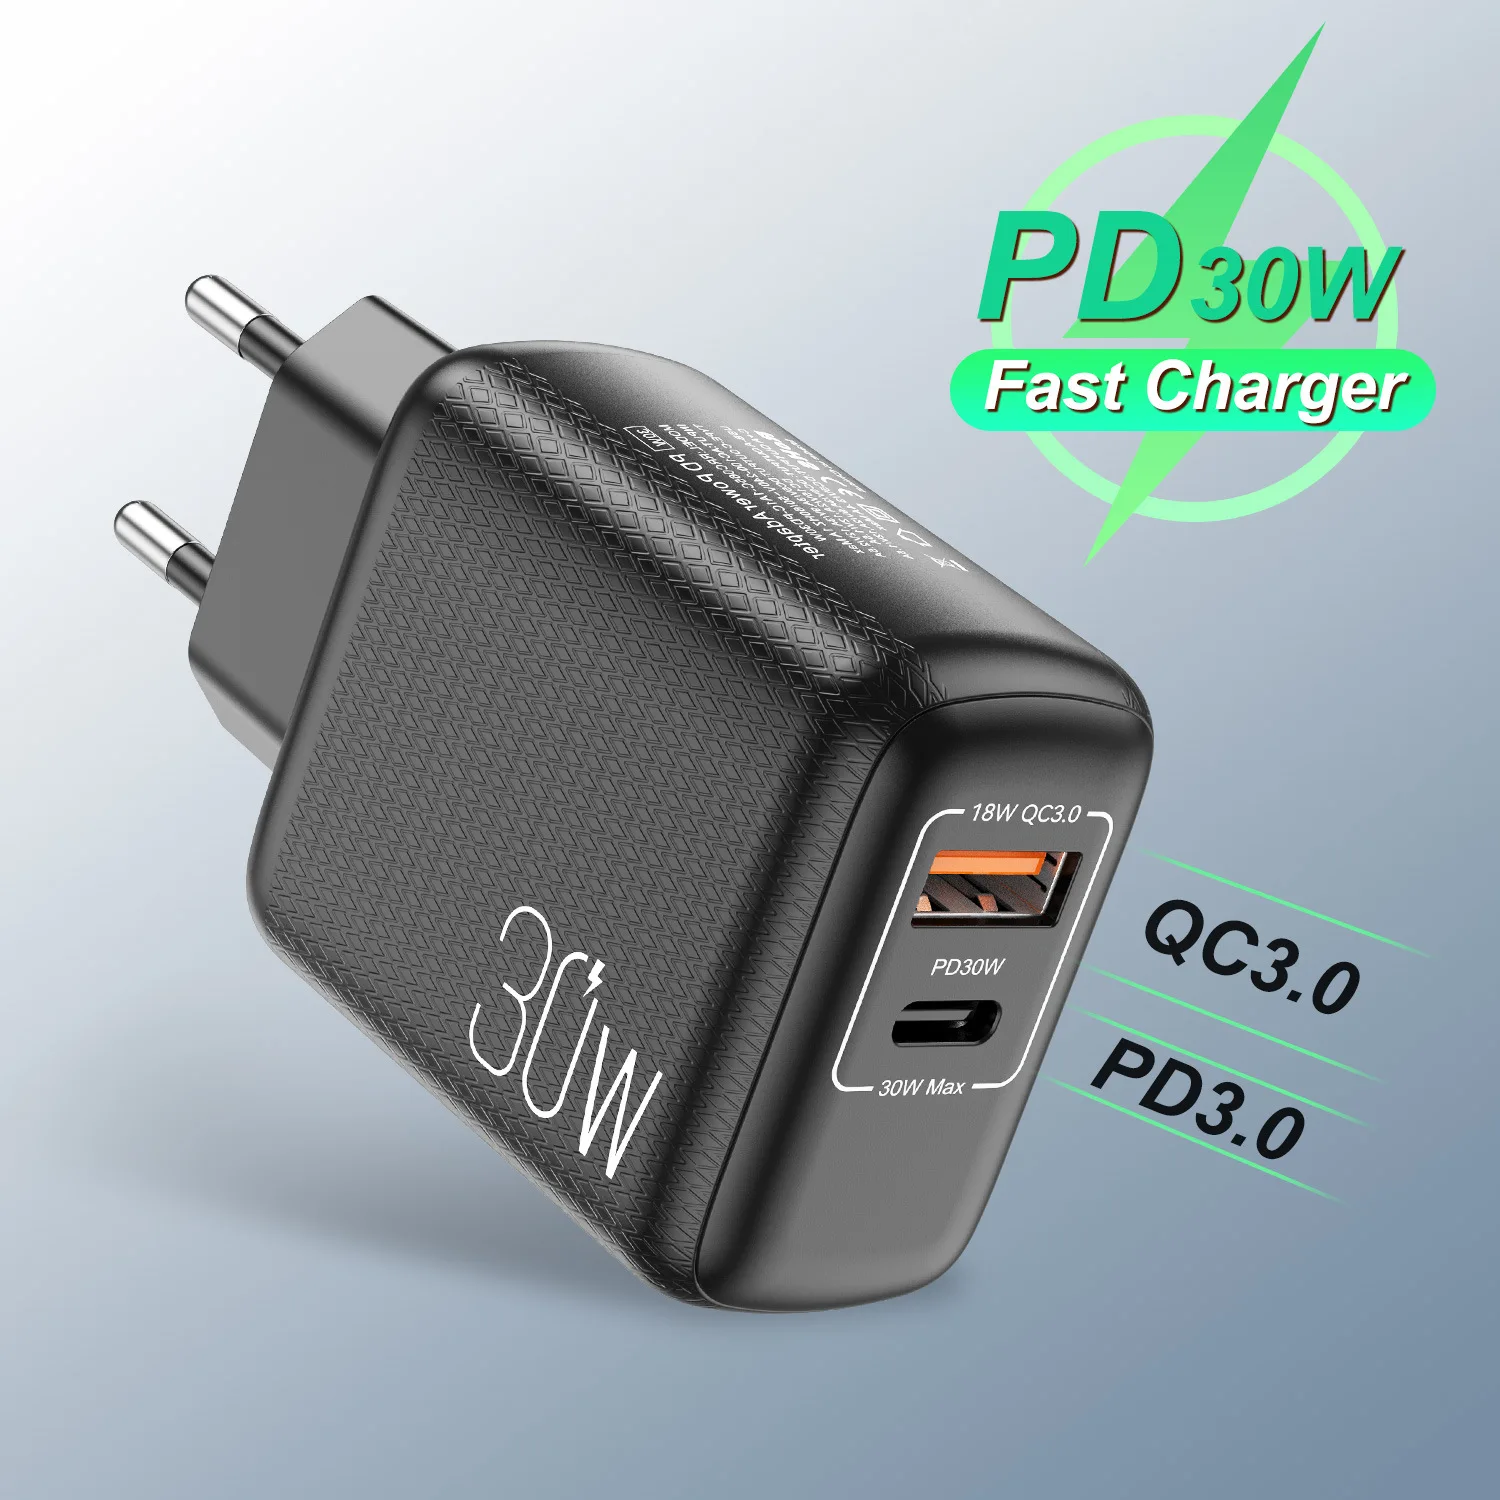 

30W USB Type C Charger Quick Charge For iPhone 13 12 Pro Max Samsung Xiaomi Mi QC 3.0 PD USBC Fast Charging Phone charger